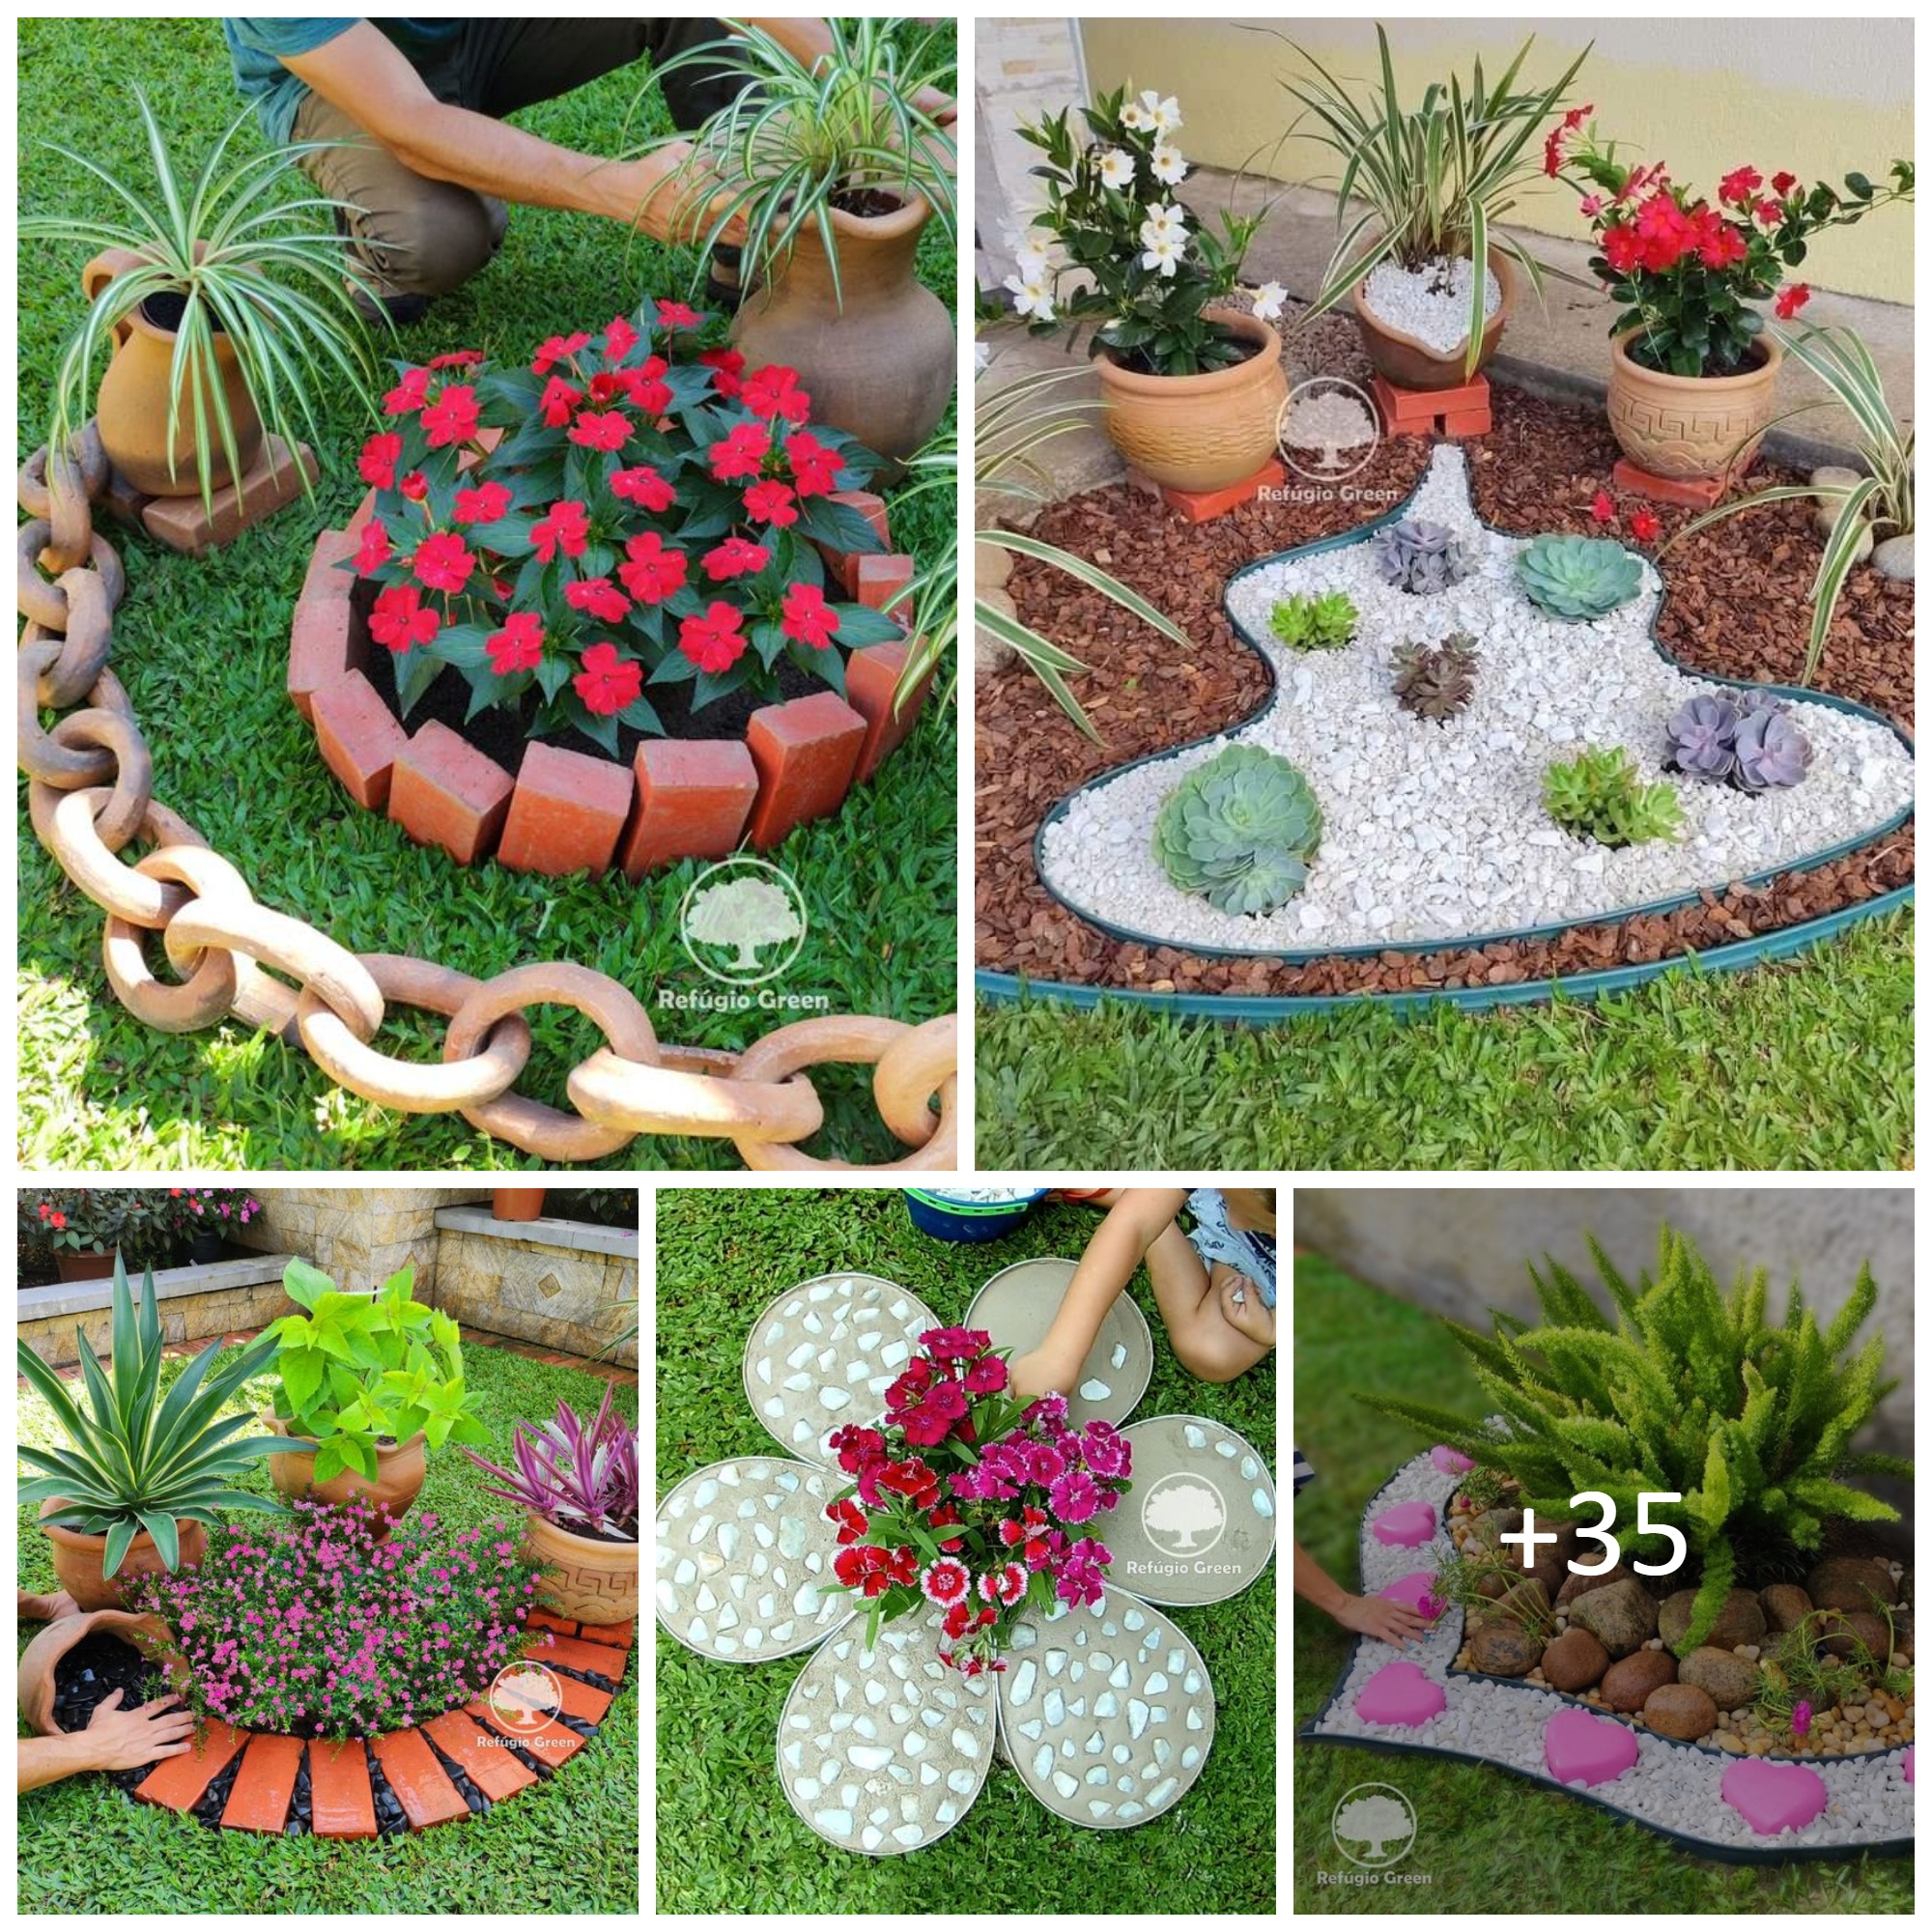 Garden decoration with stones for natural look of the garden